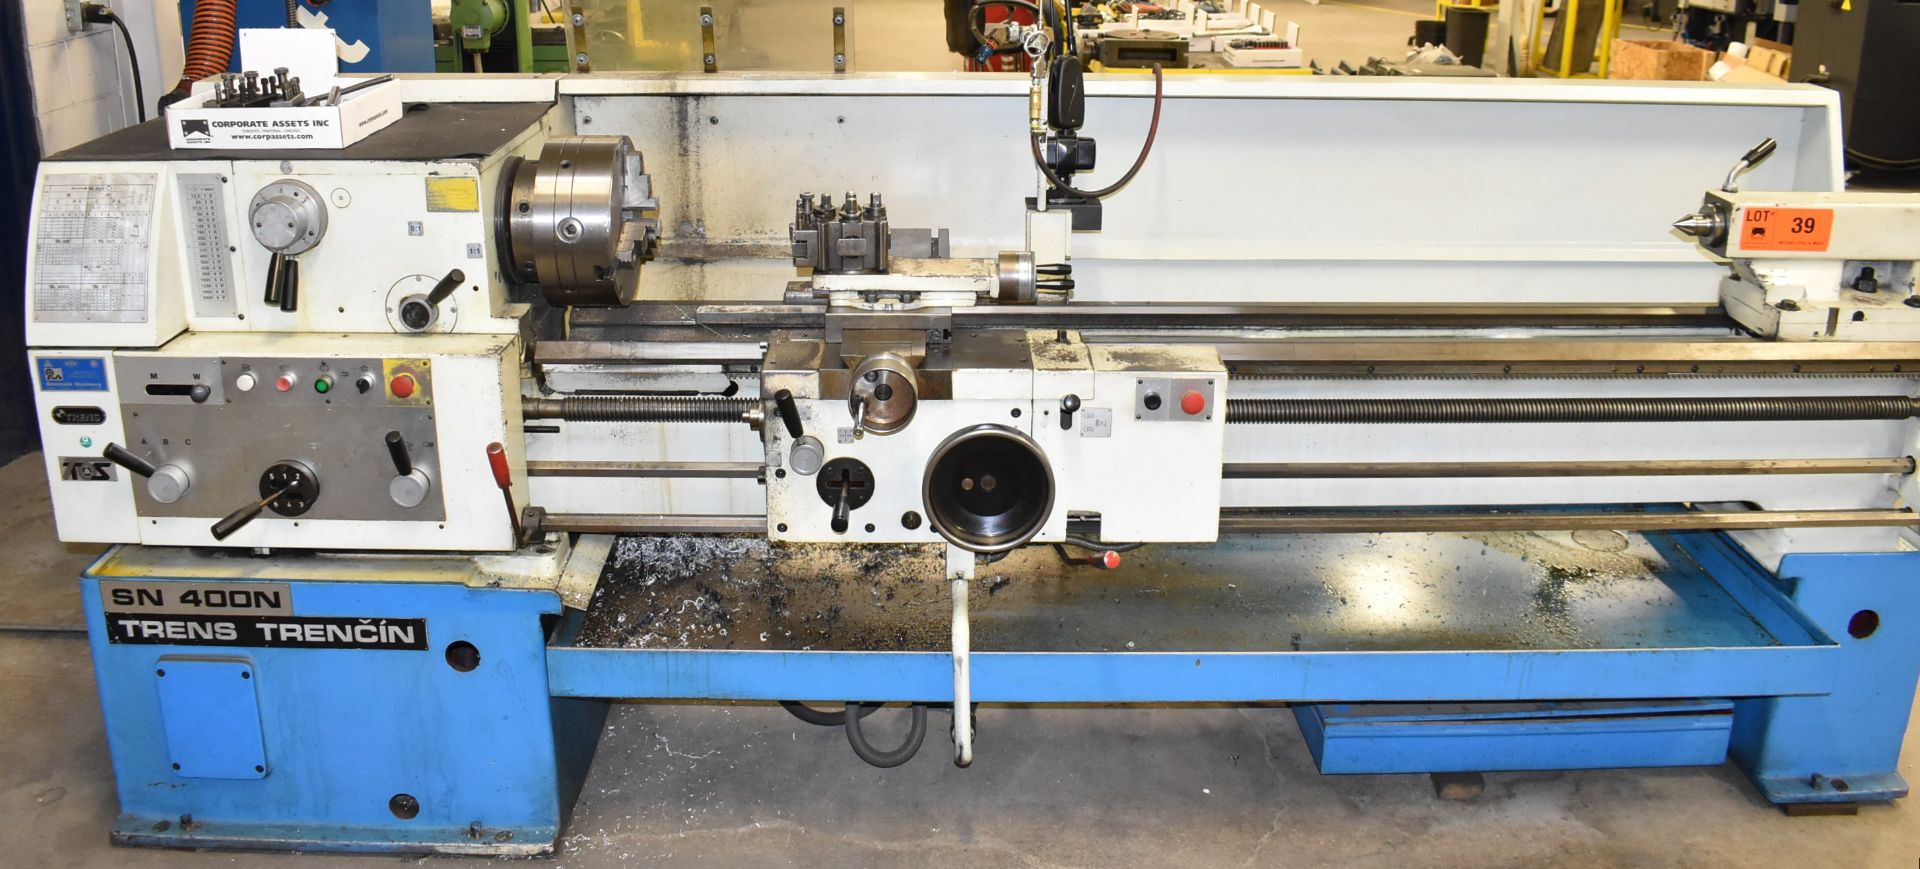 TOS TRENS TRENCIN SN 400N GAP BED ENGINE LATHE WITH 16.14" SWING OVER BED, 78.74" BETWEEN CENTERS, - Image 2 of 11